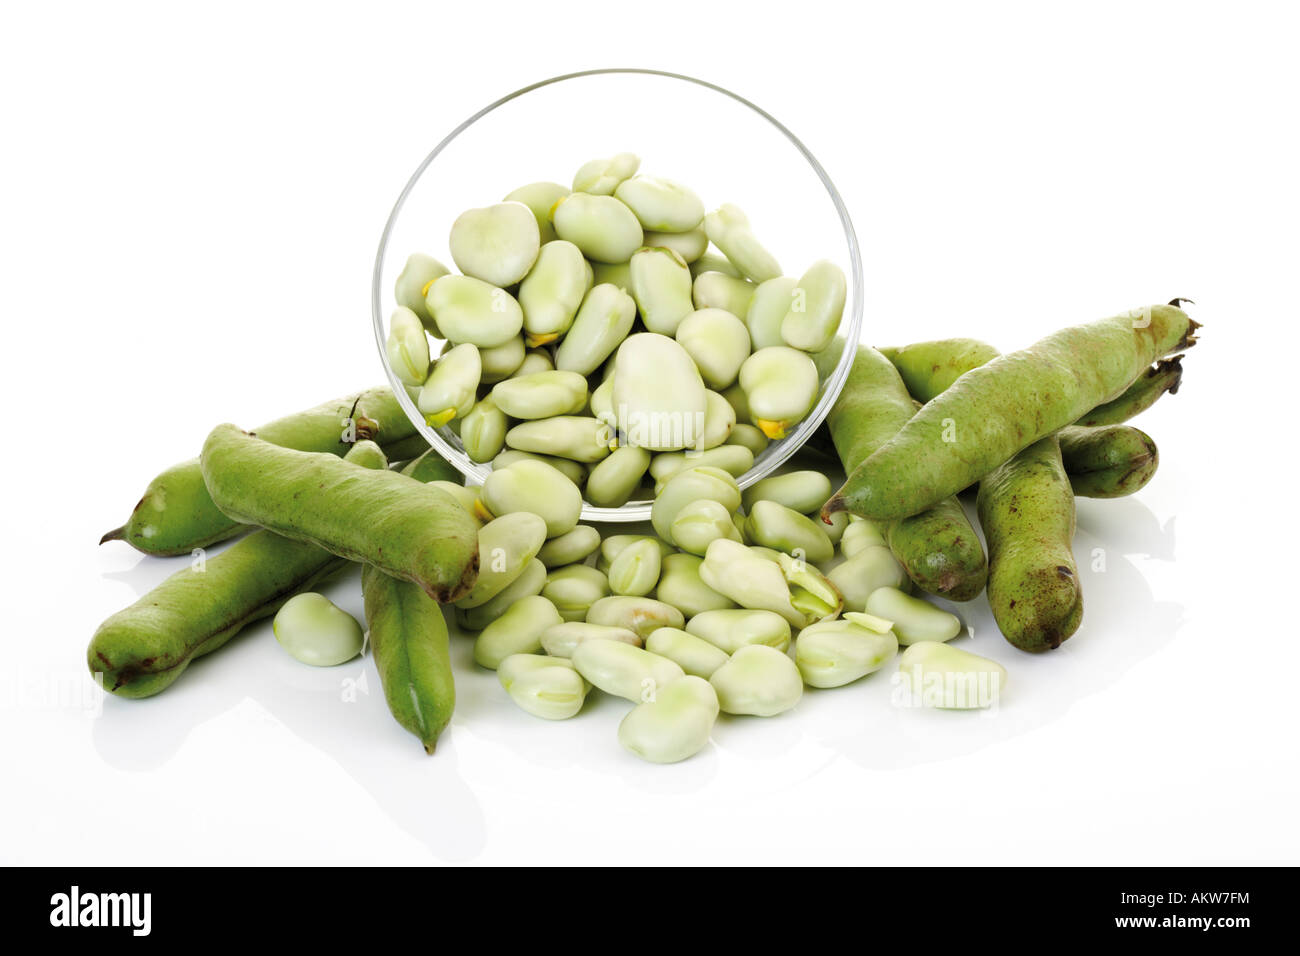 Broad beans, close-up Stock Photo